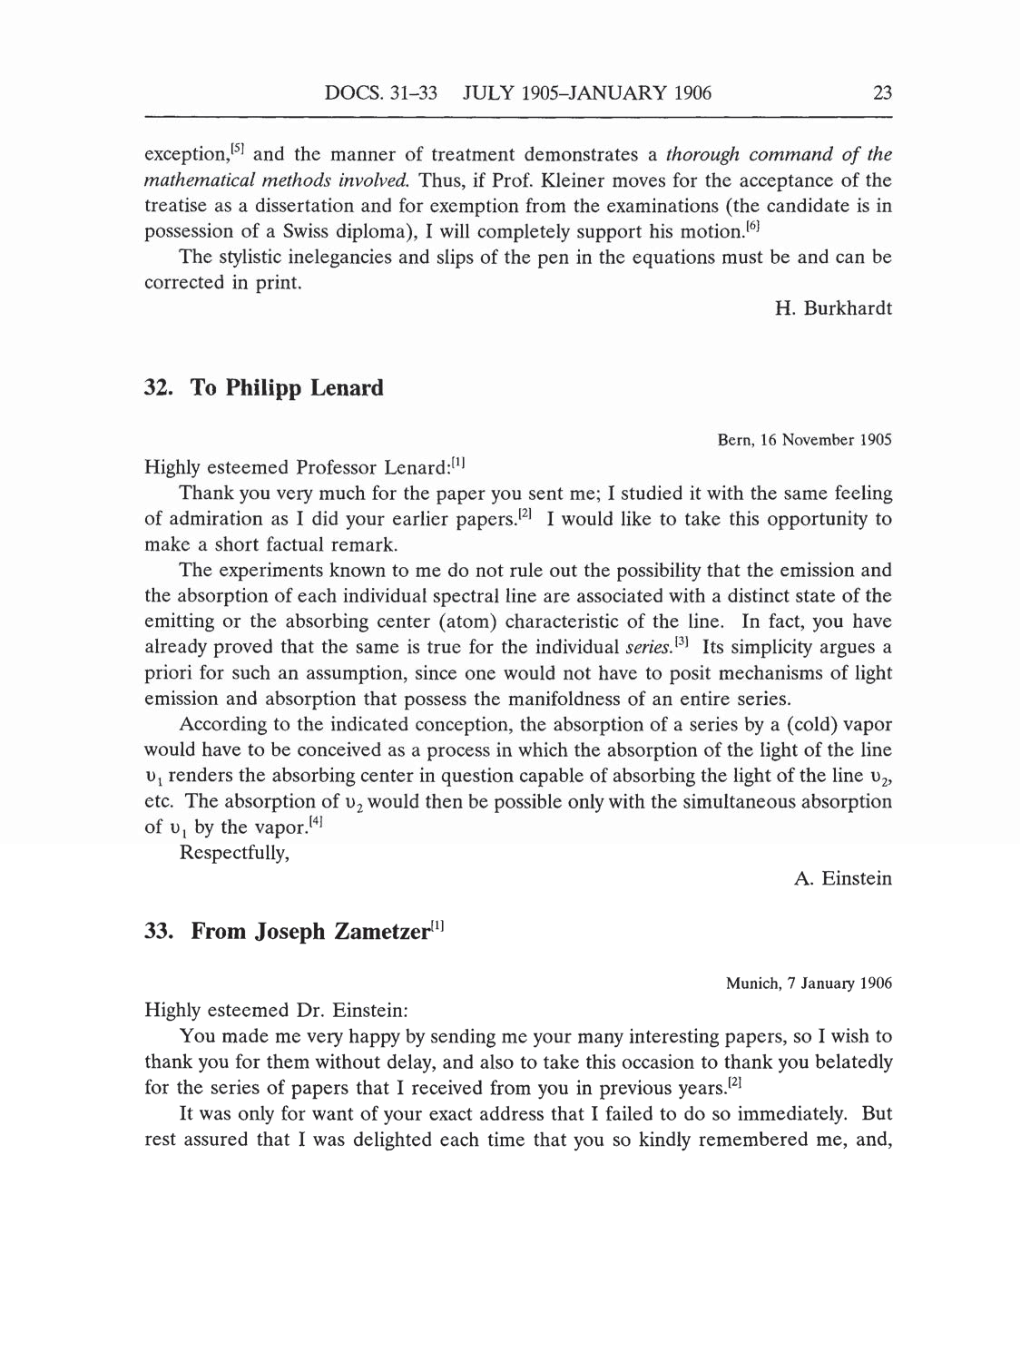 Volume 5: The Swiss Years: Correspondence, 1902-1914 (English translation supplement) page 23